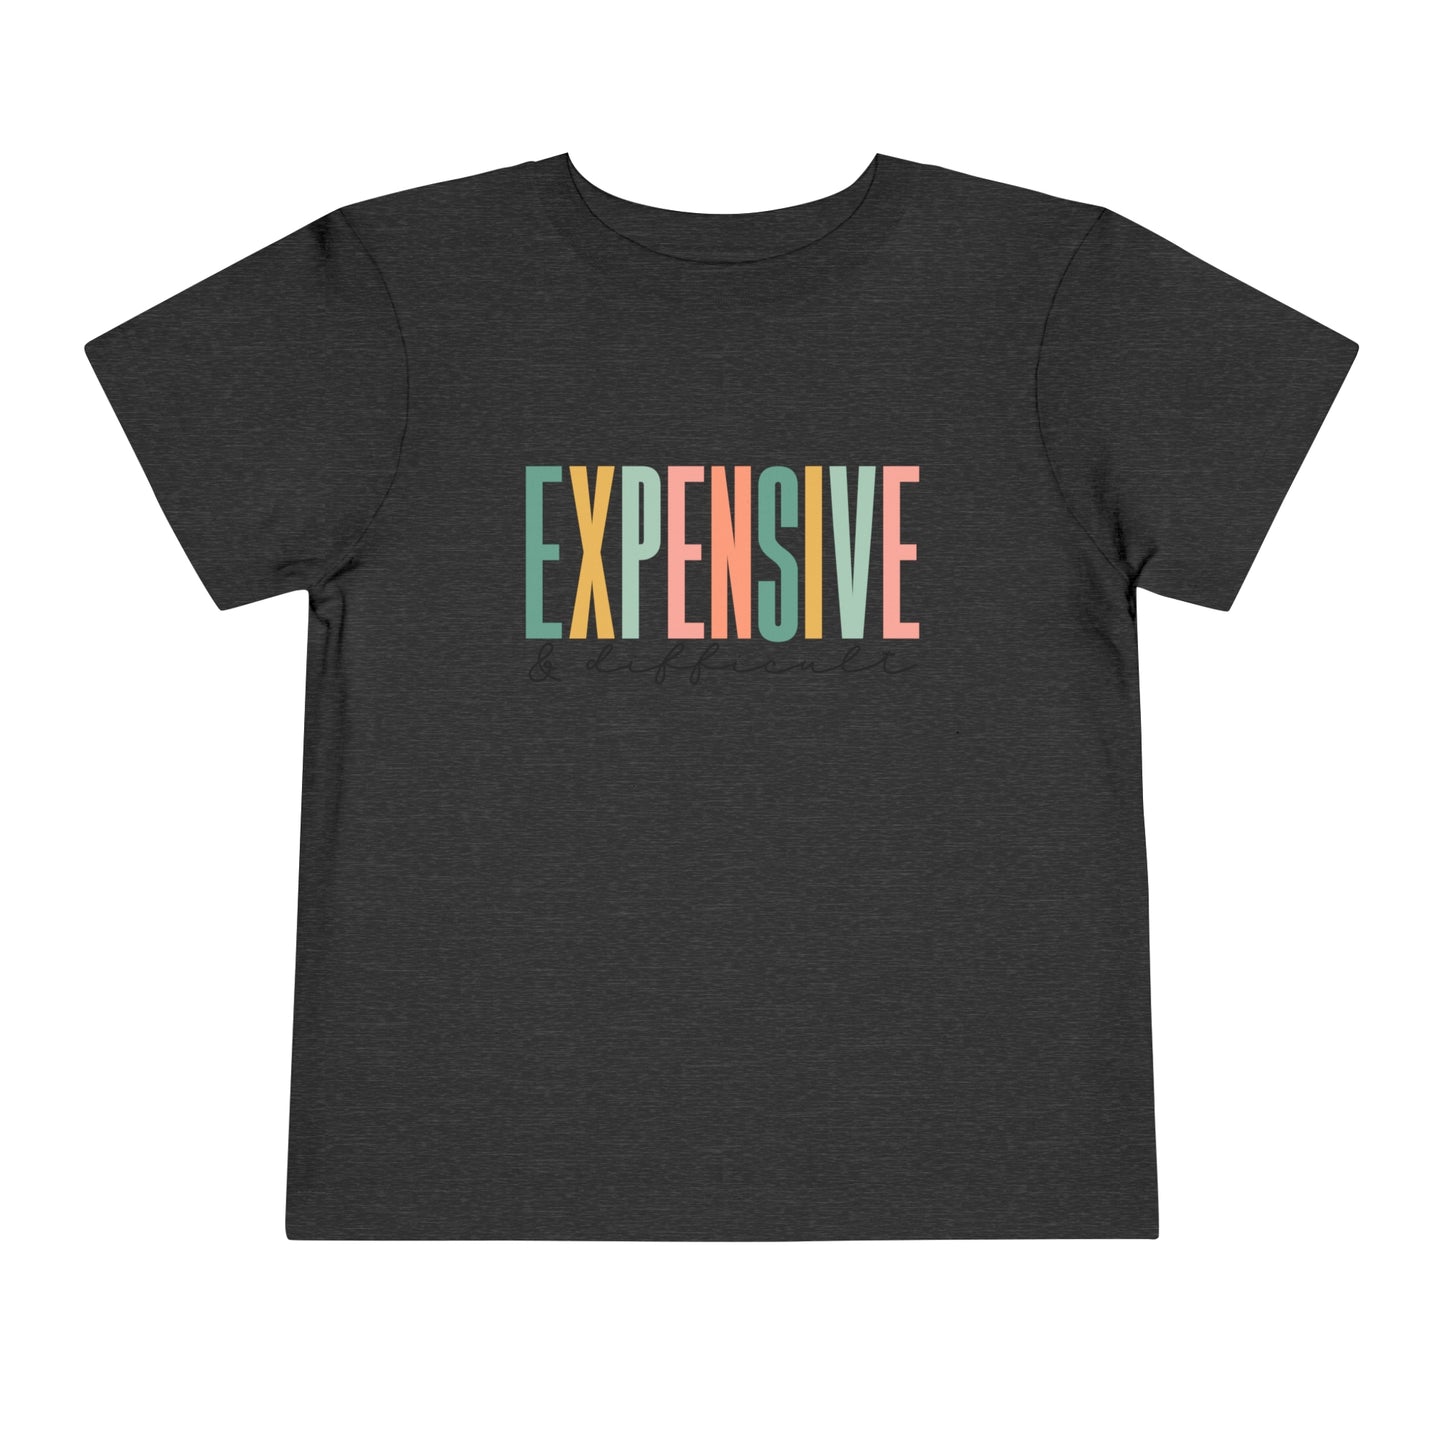 Expensive & Difficult Funny Toddler Short Sleeve Tshirt